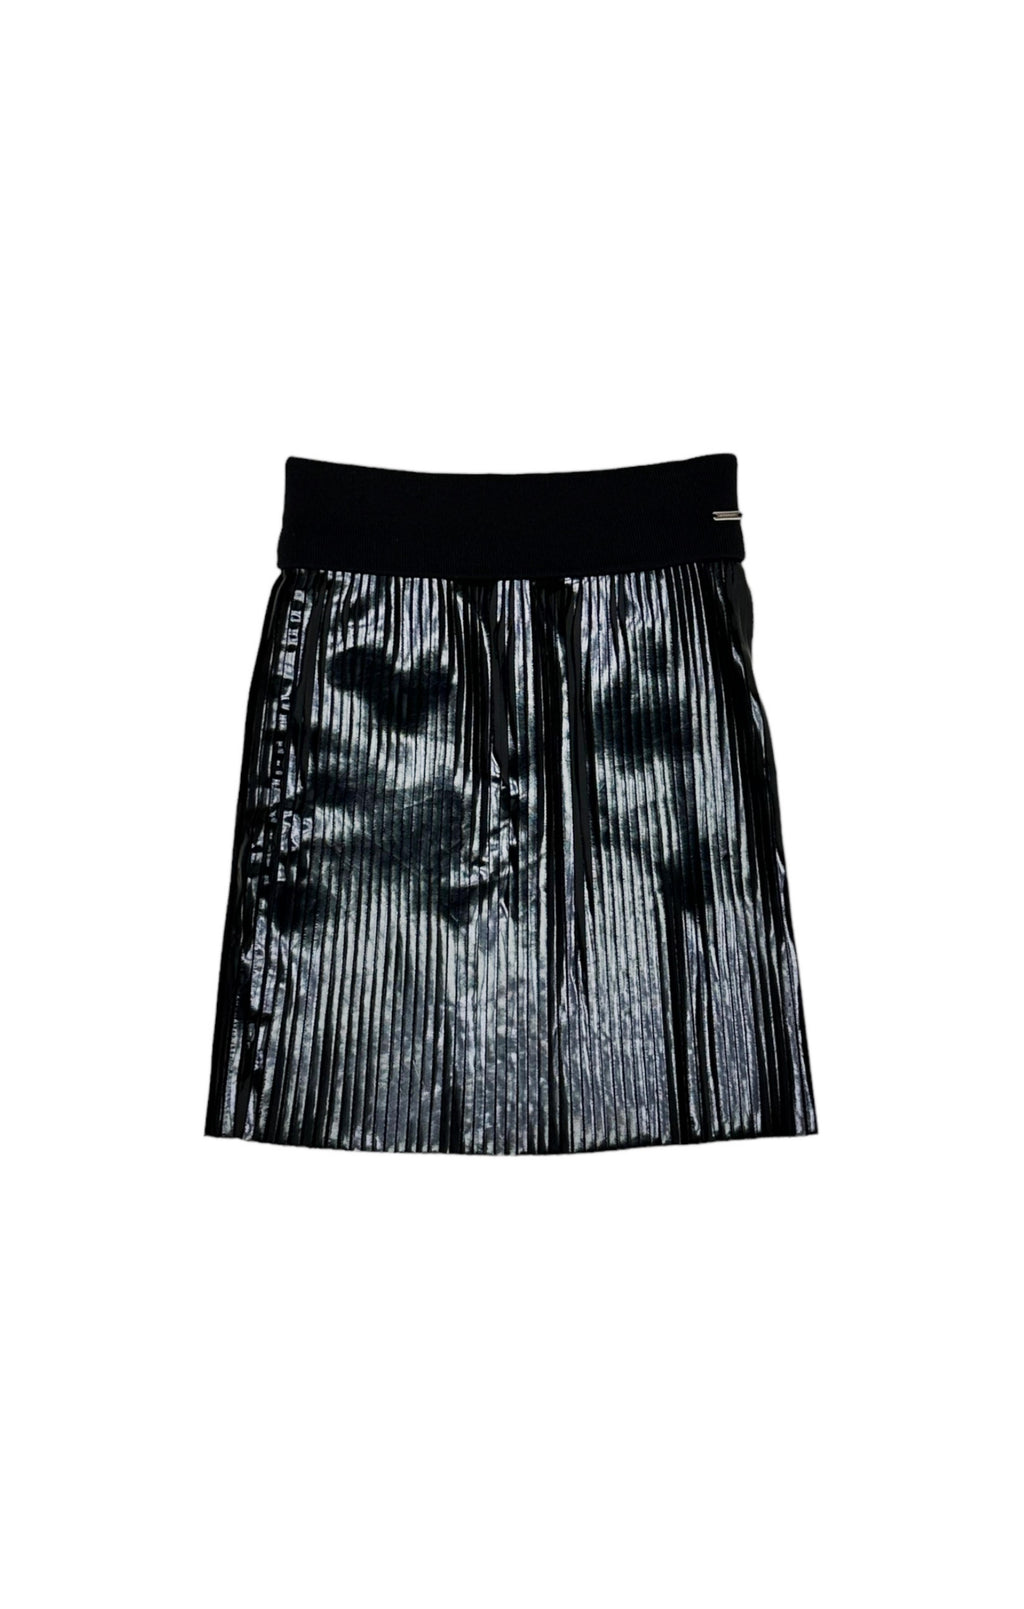 GIVENCHY (RARE) Skirt Size: 5 Years